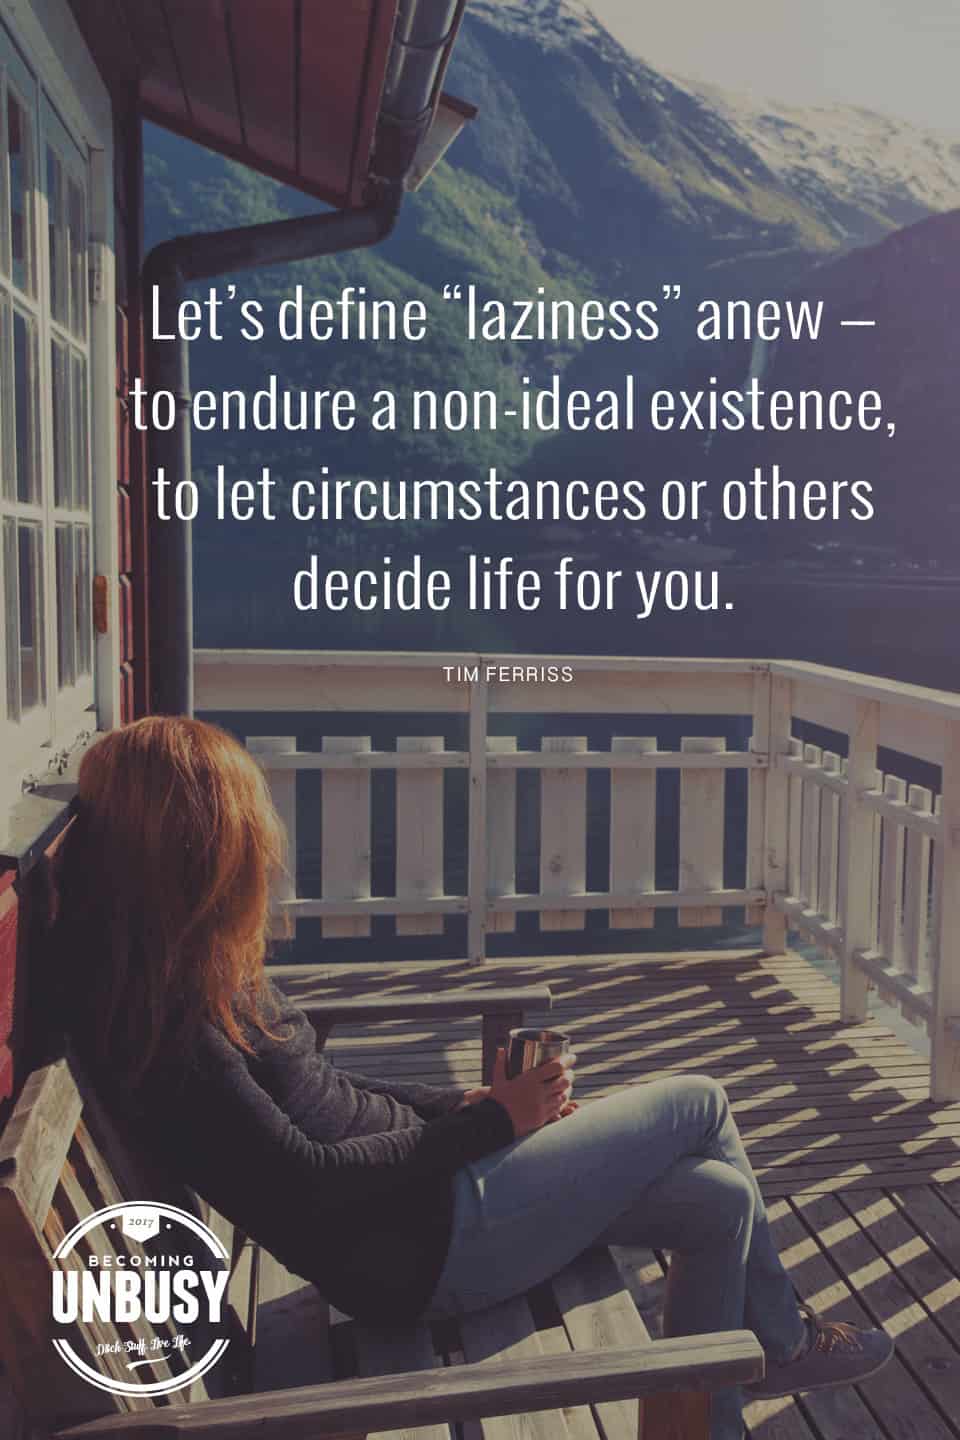 Let’s define “laziness” anew—to endure a non-ideal existence, to let circumstances or others decide life for you, or to amass a fortune while passing through life like a spectator from an office window. The size of your bank account doesn’t change this, nor does the number of hours you log in handing unimportant email or minutiae. Focus on being productive instead of being busy. - Tim Ferriss *Love this quote